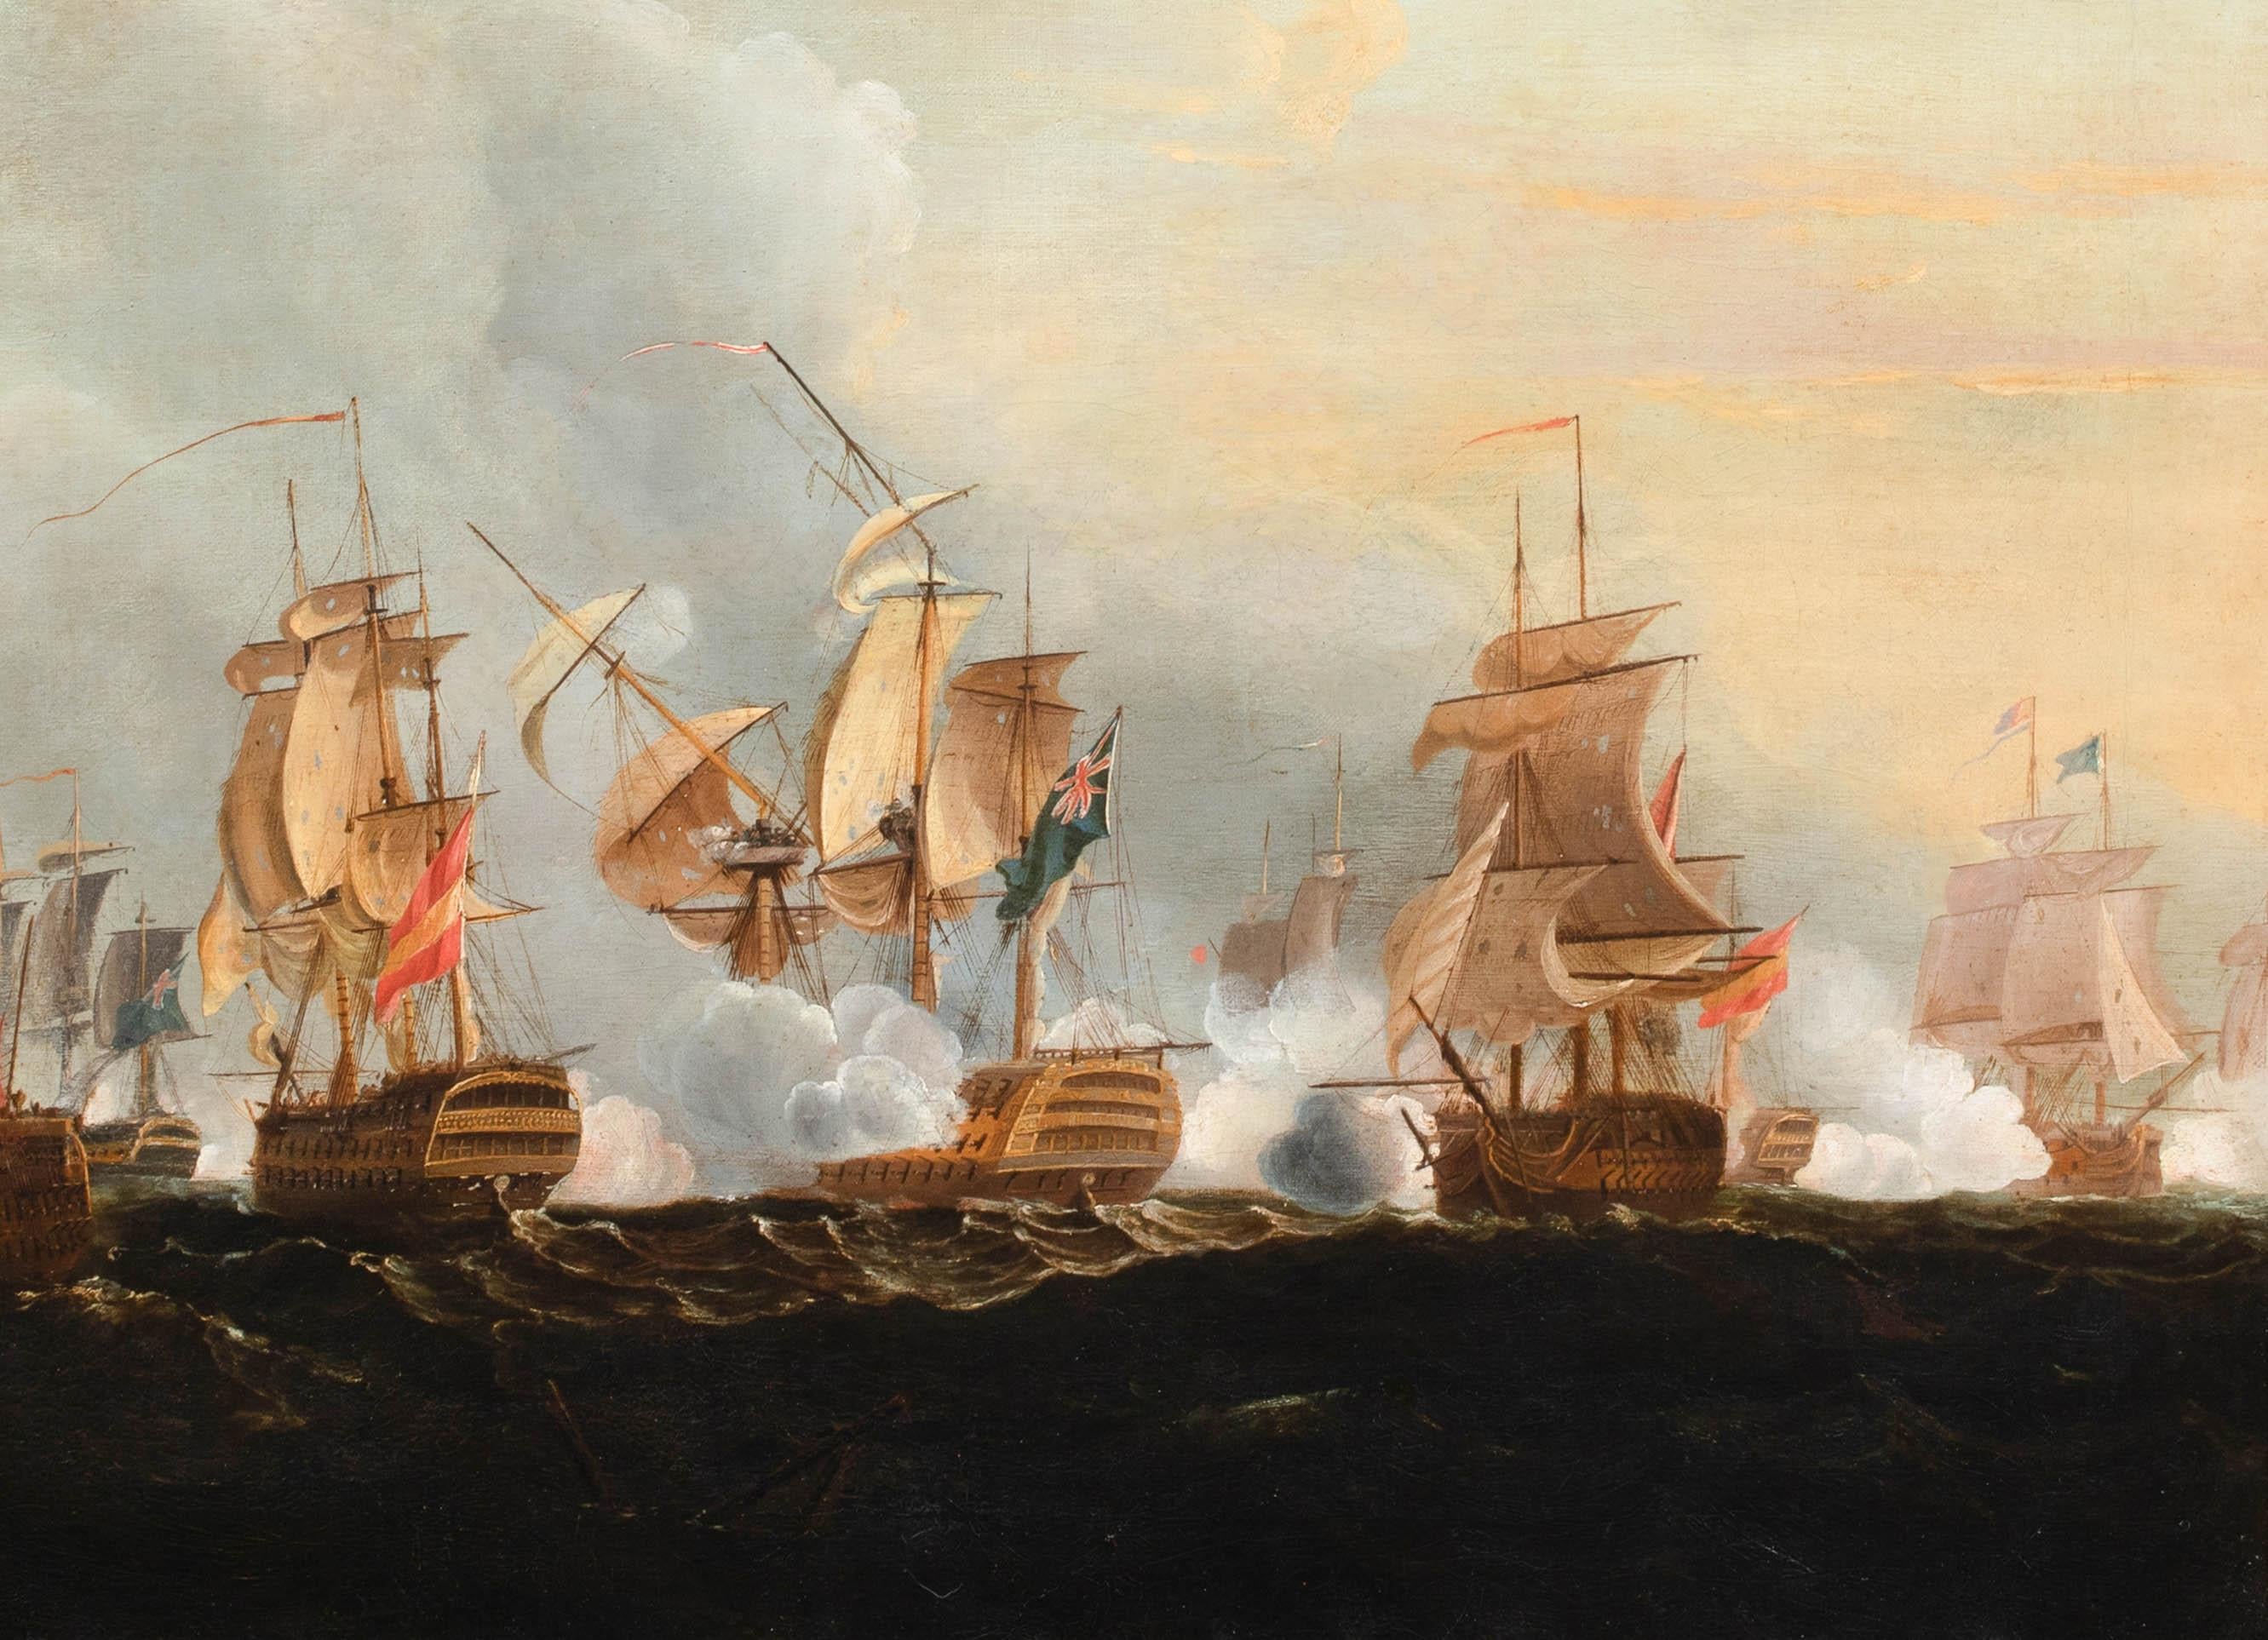 The Last Action Of Santisima Trinidad At The Battle Of Trafalgar, 1805 - Beige Landscape Painting by Thomas Luny